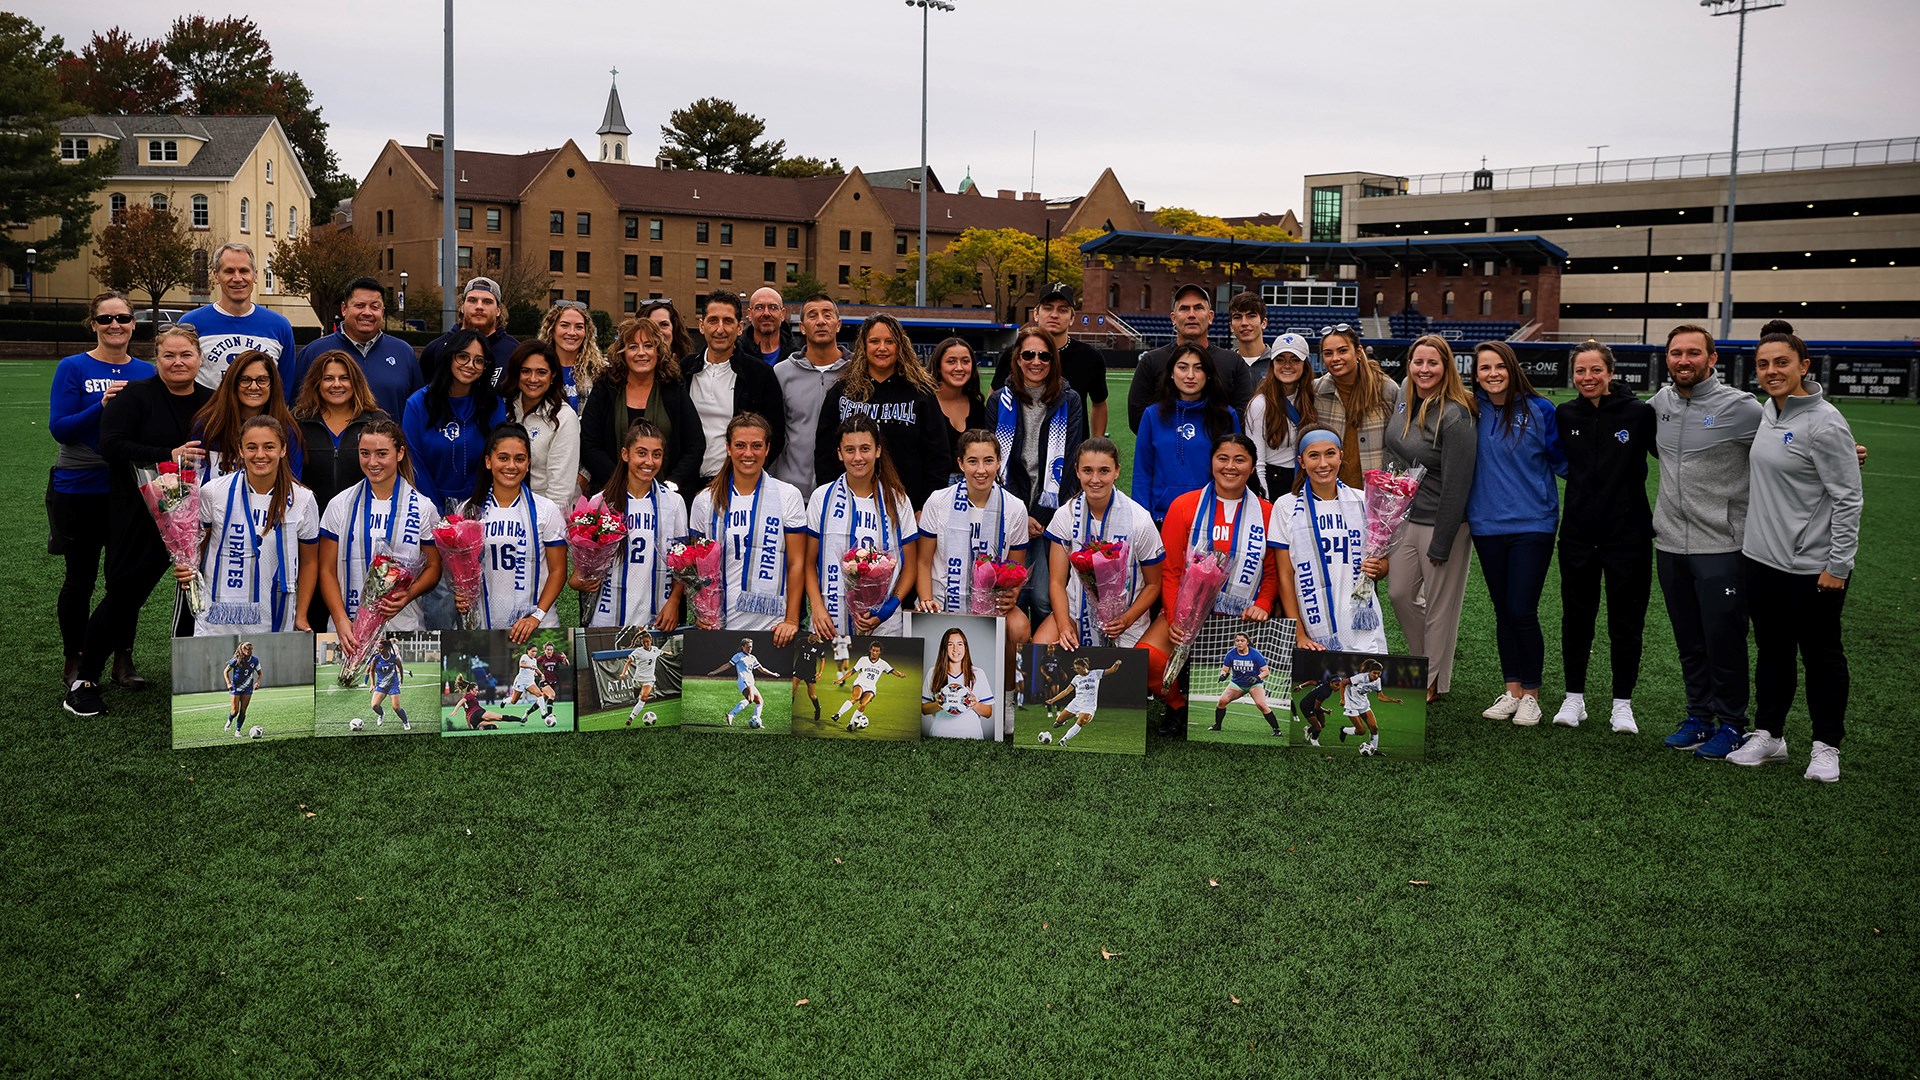 The Seton Hall women's soccer team poses for a photo with their parents during Senior Night.